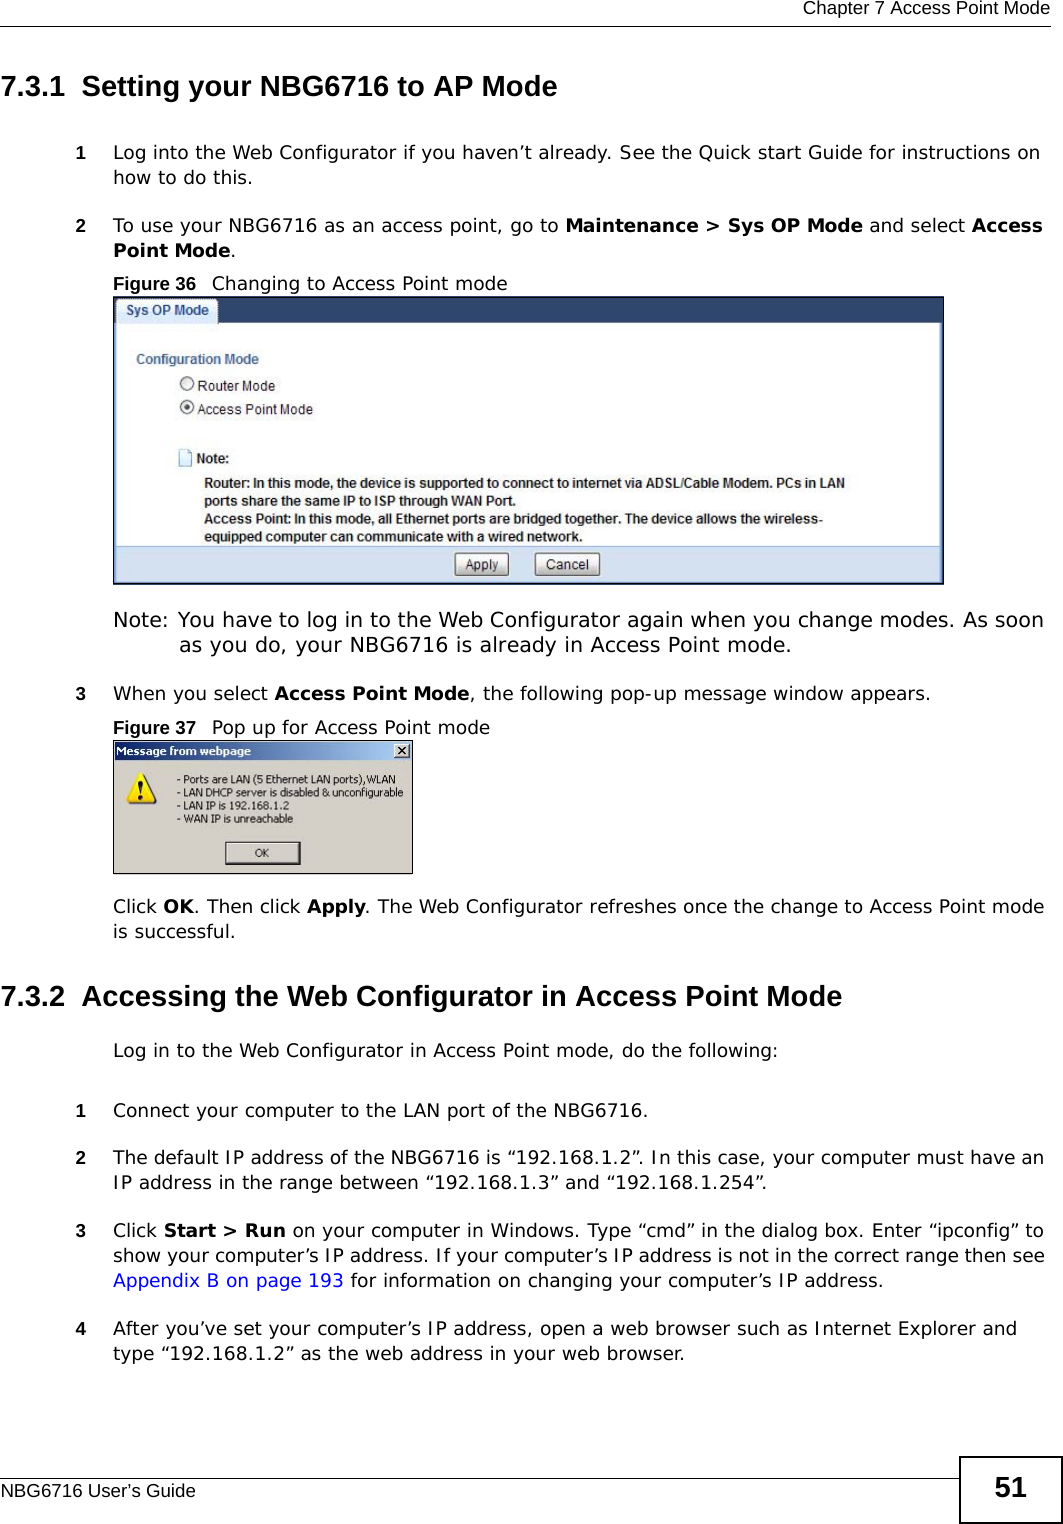  Chapter 7 Access Point ModeNBG6716 User’s Guide 517.3.1  Setting your NBG6716 to AP Mode1Log into the Web Configurator if you haven’t already. See the Quick start Guide for instructions on how to do this.2To use your NBG6716 as an access point, go to Maintenance &gt; Sys OP Mode and select Access Point Mode. Figure 36   Changing to Access Point modeNote: You have to log in to the Web Configurator again when you change modes. As soon as you do, your NBG6716 is already in Access Point mode.3When you select Access Point Mode, the following pop-up message window appears.Figure 37   Pop up for Access Point mode Click OK. Then click Apply. The Web Configurator refreshes once the change to Access Point mode is successful.7.3.2  Accessing the Web Configurator in Access Point ModeLog in to the Web Configurator in Access Point mode, do the following:1Connect your computer to the LAN port of the NBG6716. 2The default IP address of the NBG6716 is “192.168.1.2”. In this case, your computer must have an IP address in the range between “192.168.1.3” and “192.168.1.254”.3Click Start &gt; Run on your computer in Windows. Type “cmd” in the dialog box. Enter “ipconfig” to show your computer’s IP address. If your computer’s IP address is not in the correct range then see Appendix B on page 193 for information on changing your computer’s IP address.4After you’ve set your computer’s IP address, open a web browser such as Internet Explorer and type “192.168.1.2” as the web address in your web browser.